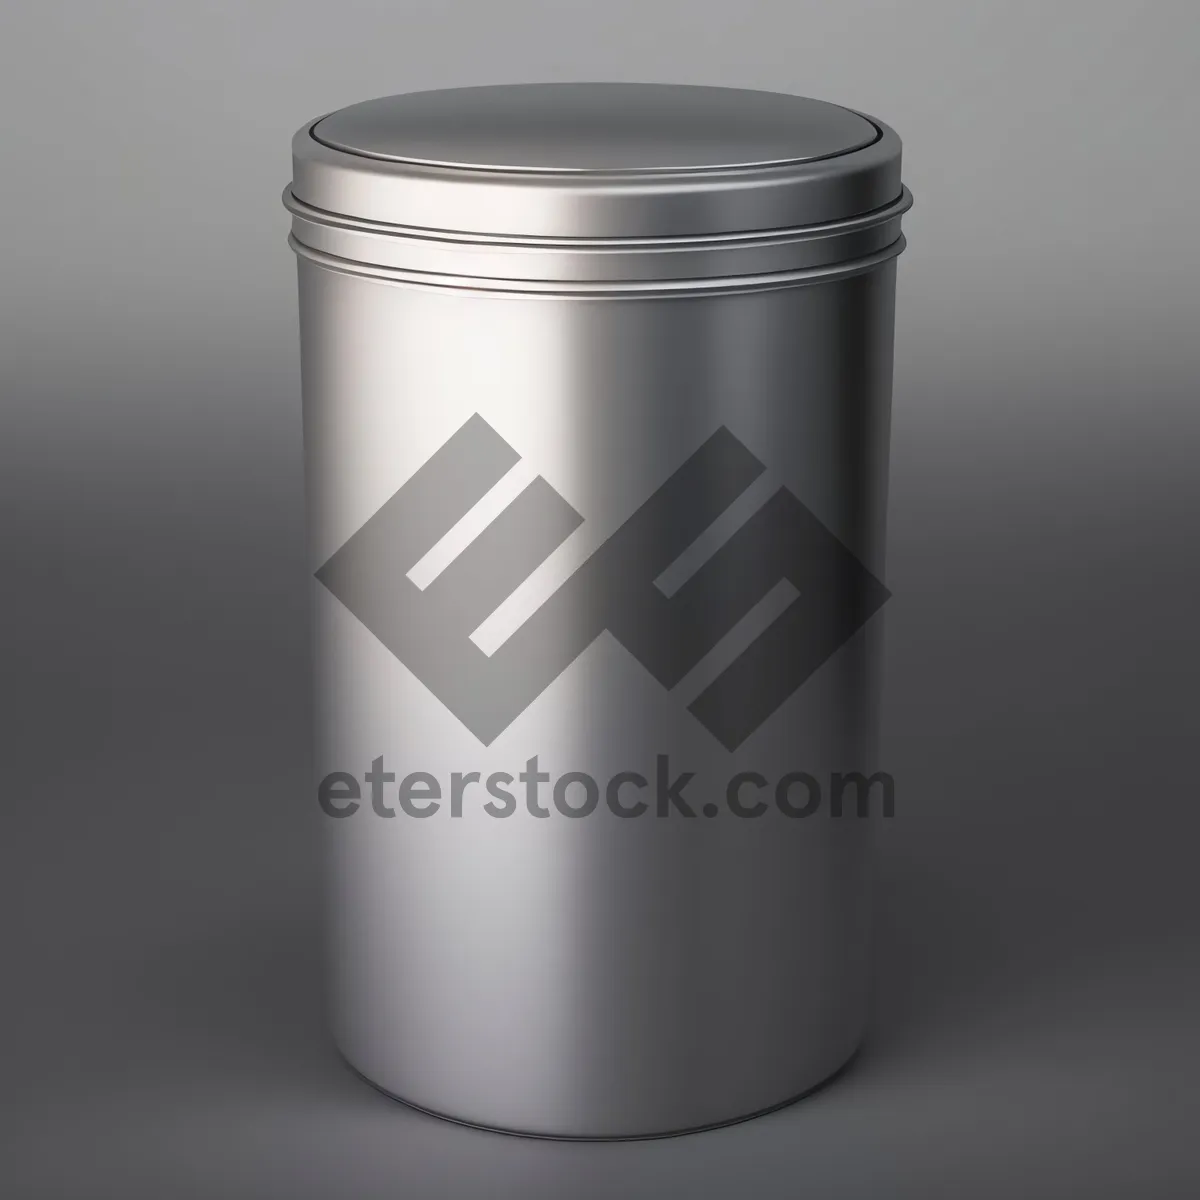 Picture of Metal Cup Empty in Bin